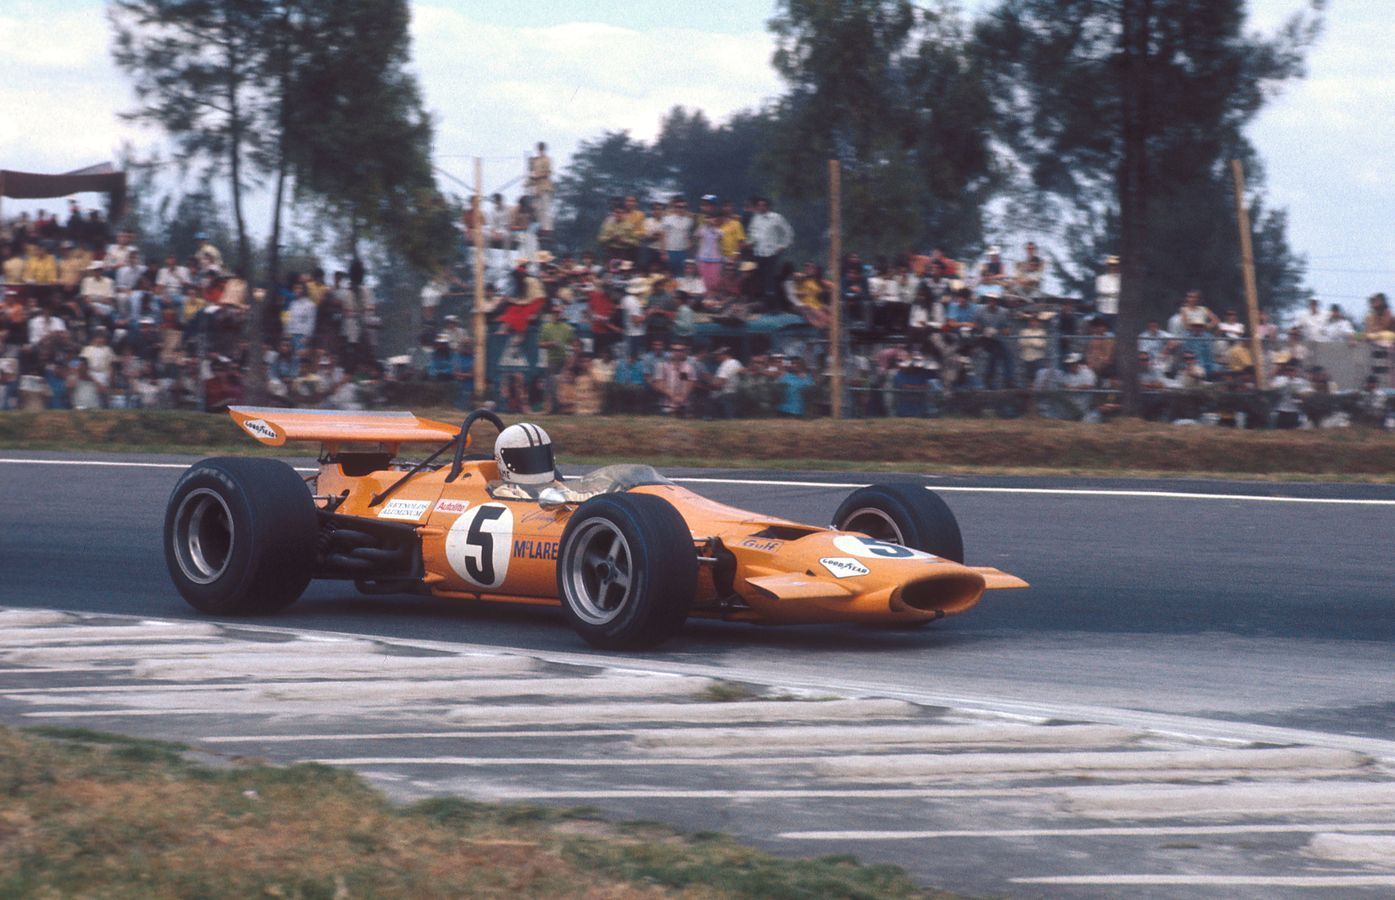 Denny on his way to victory in 1969